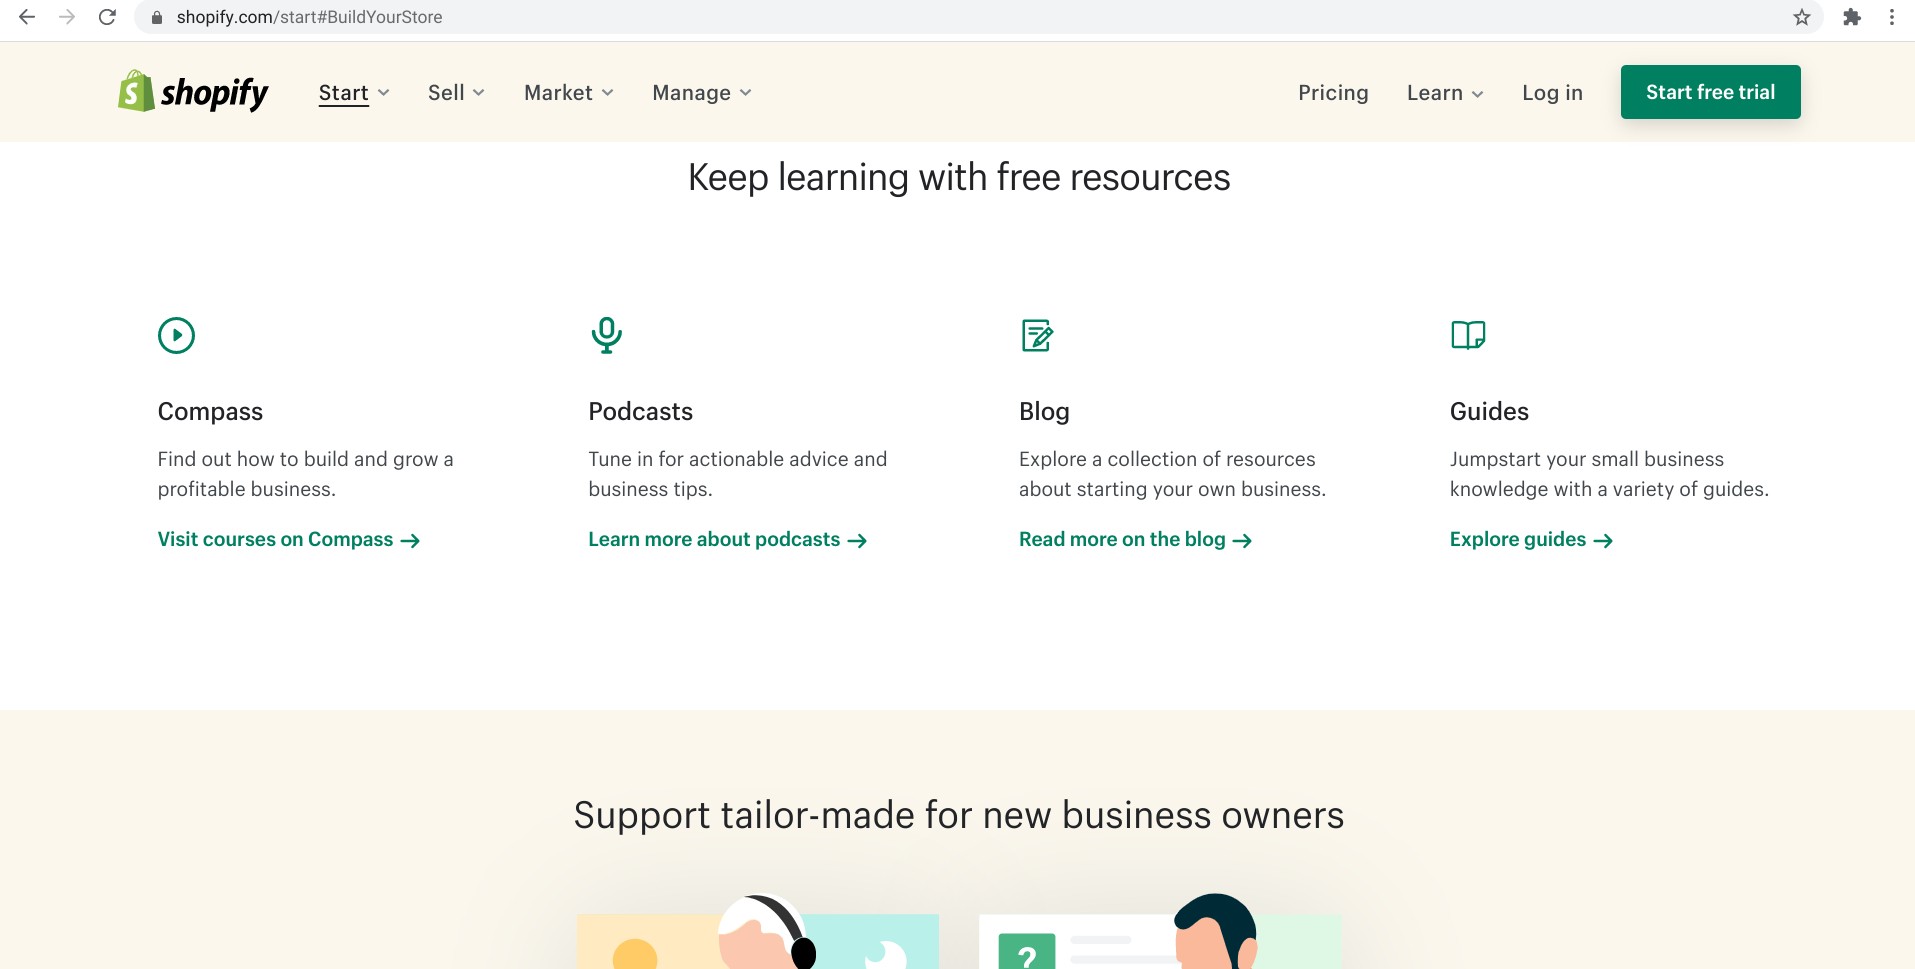 Screenshot of the different free learning resources offered by Shopify for their customers on Shopify.com